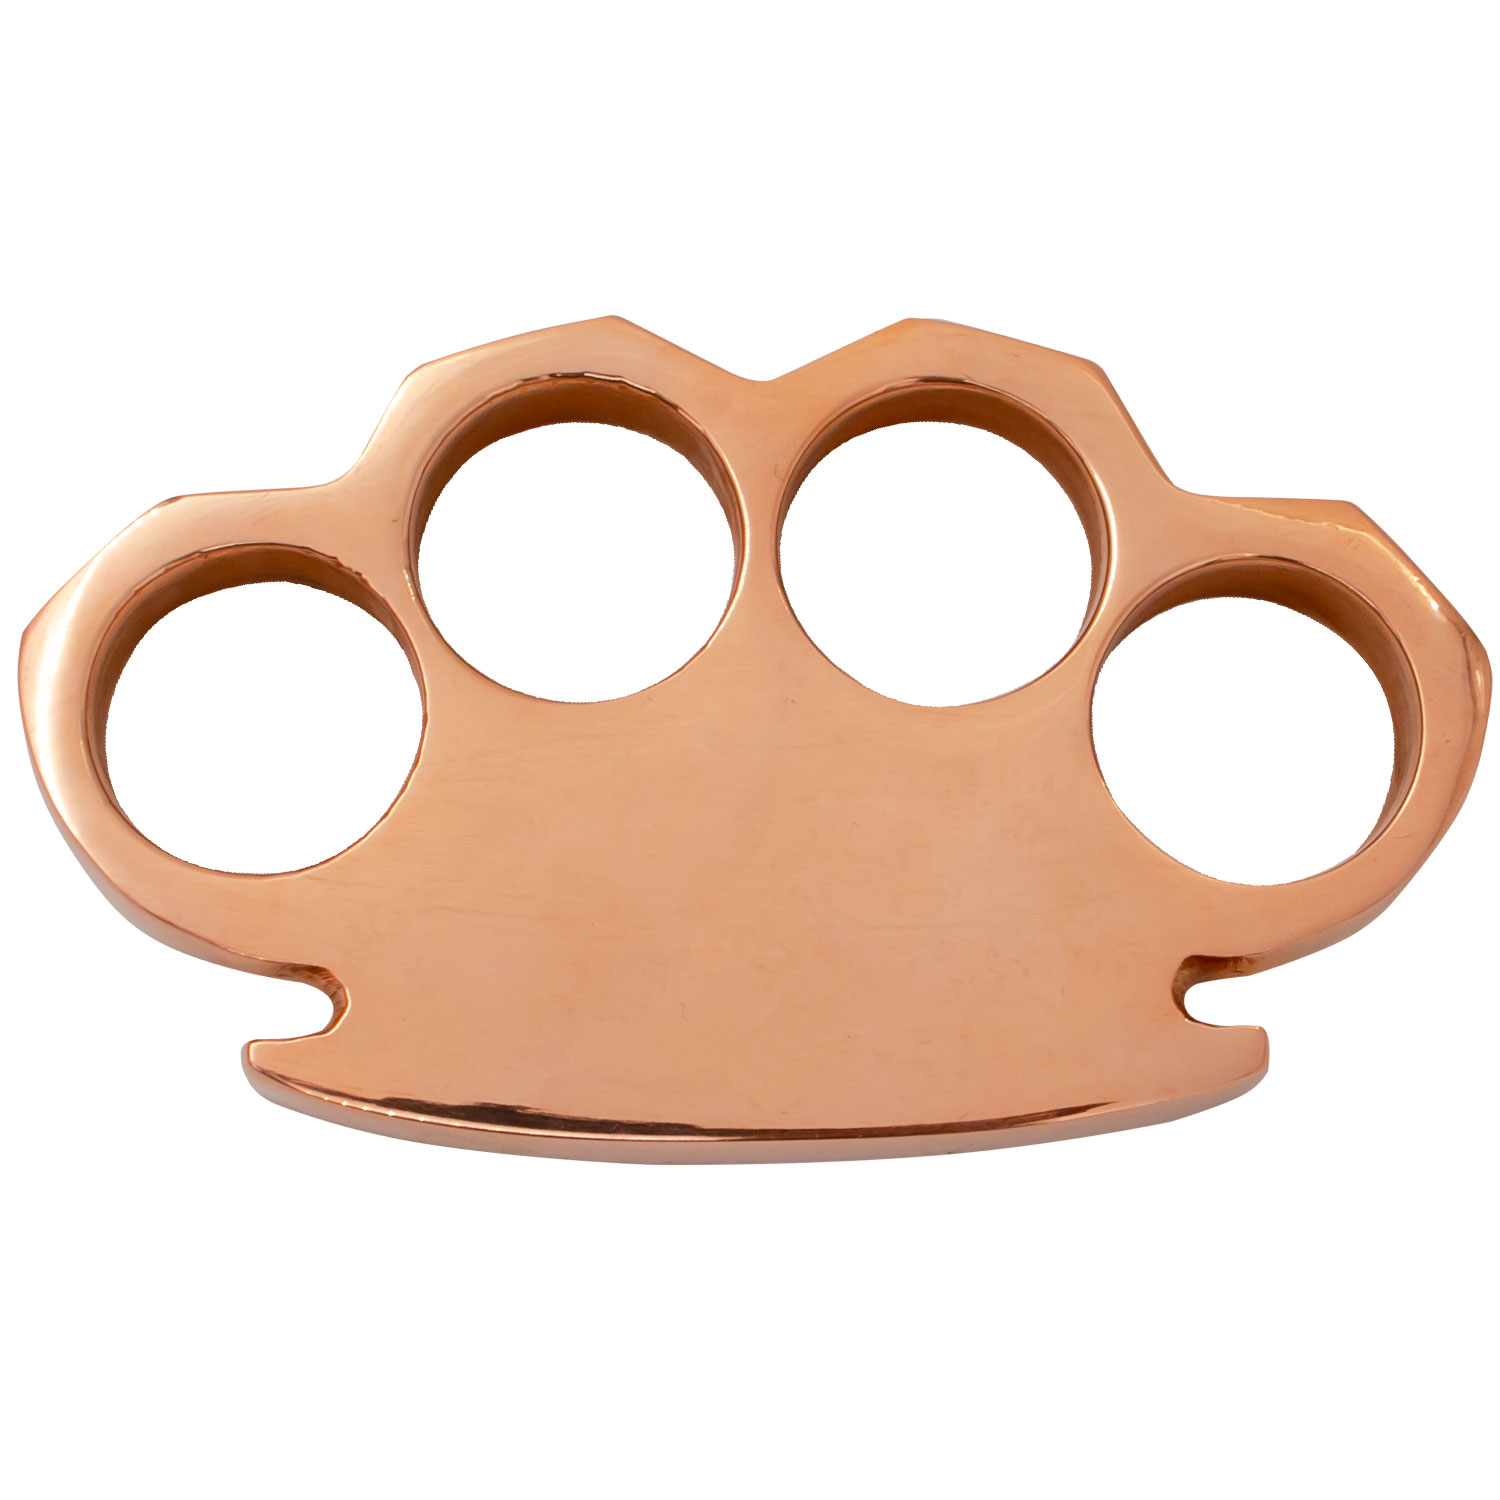 Over 15 Ounces Solid Copper Knuckles